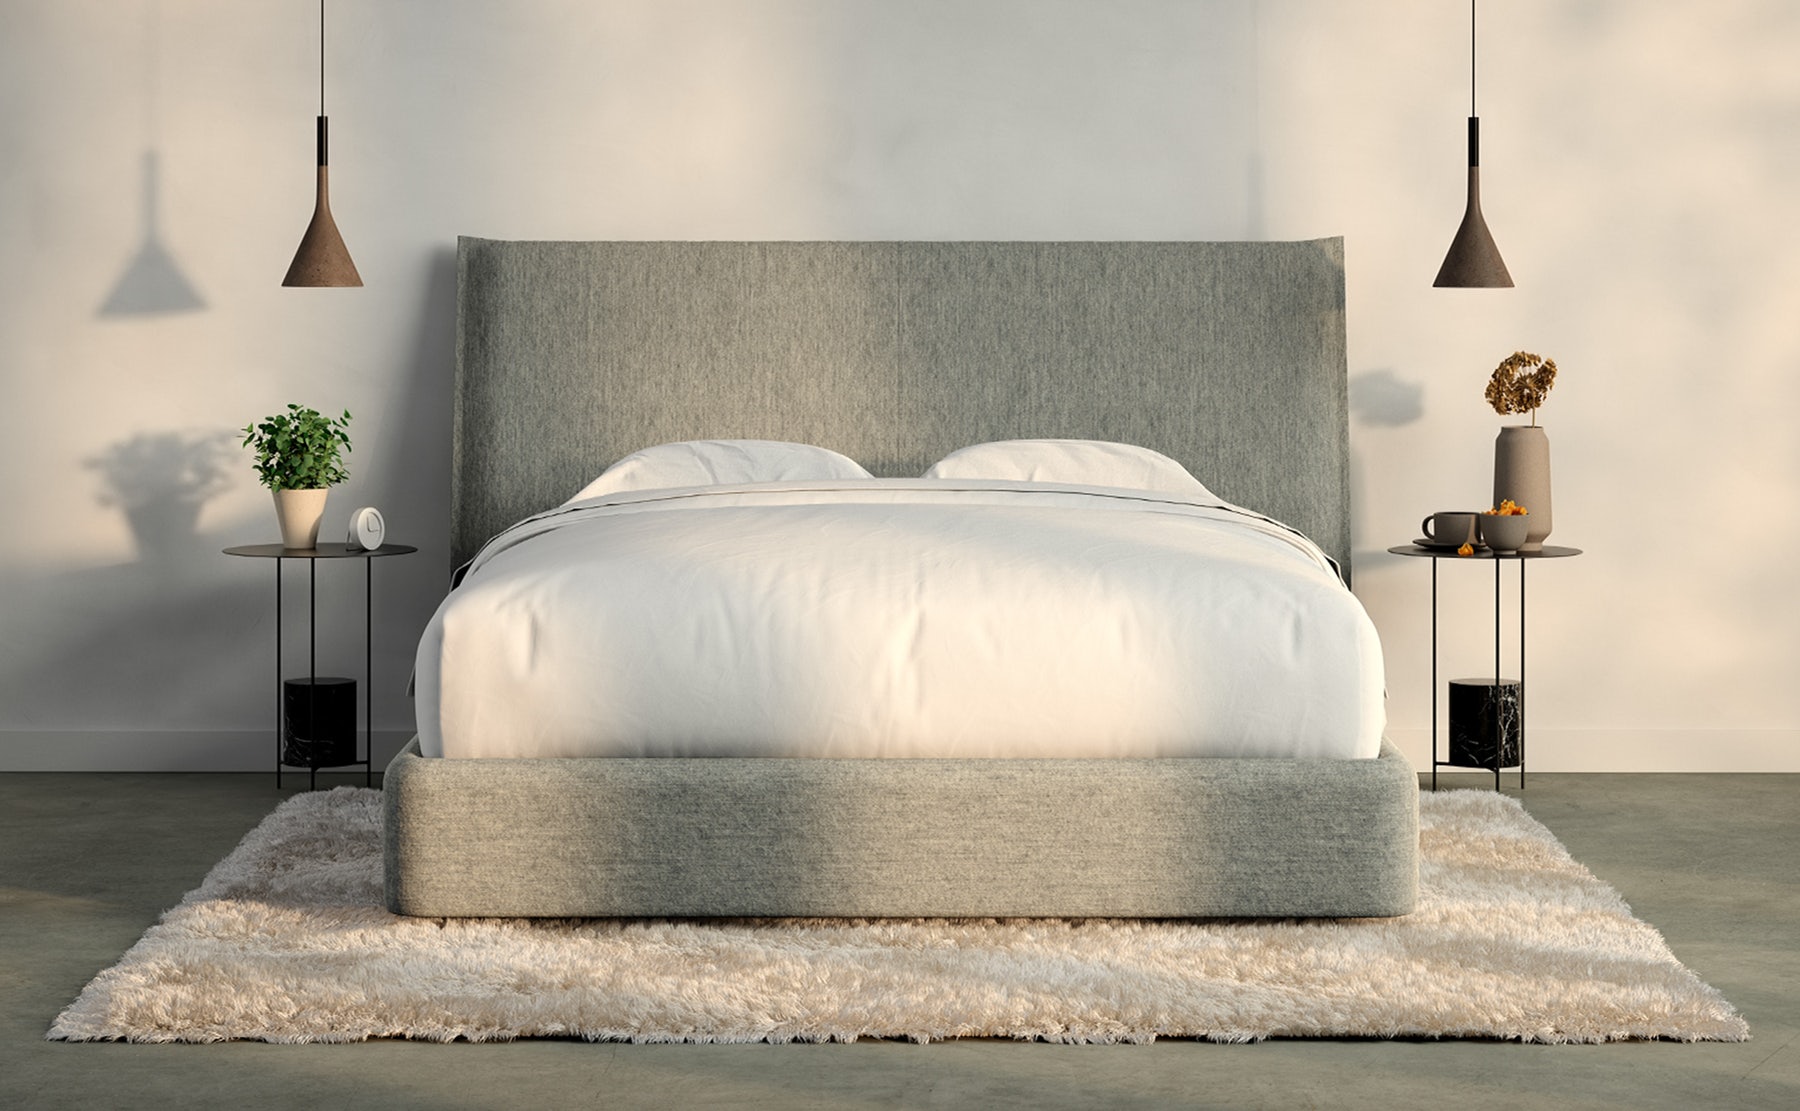 Mattress Sizes And Bed Dimensions Guide, Bigger Than King Size Bed